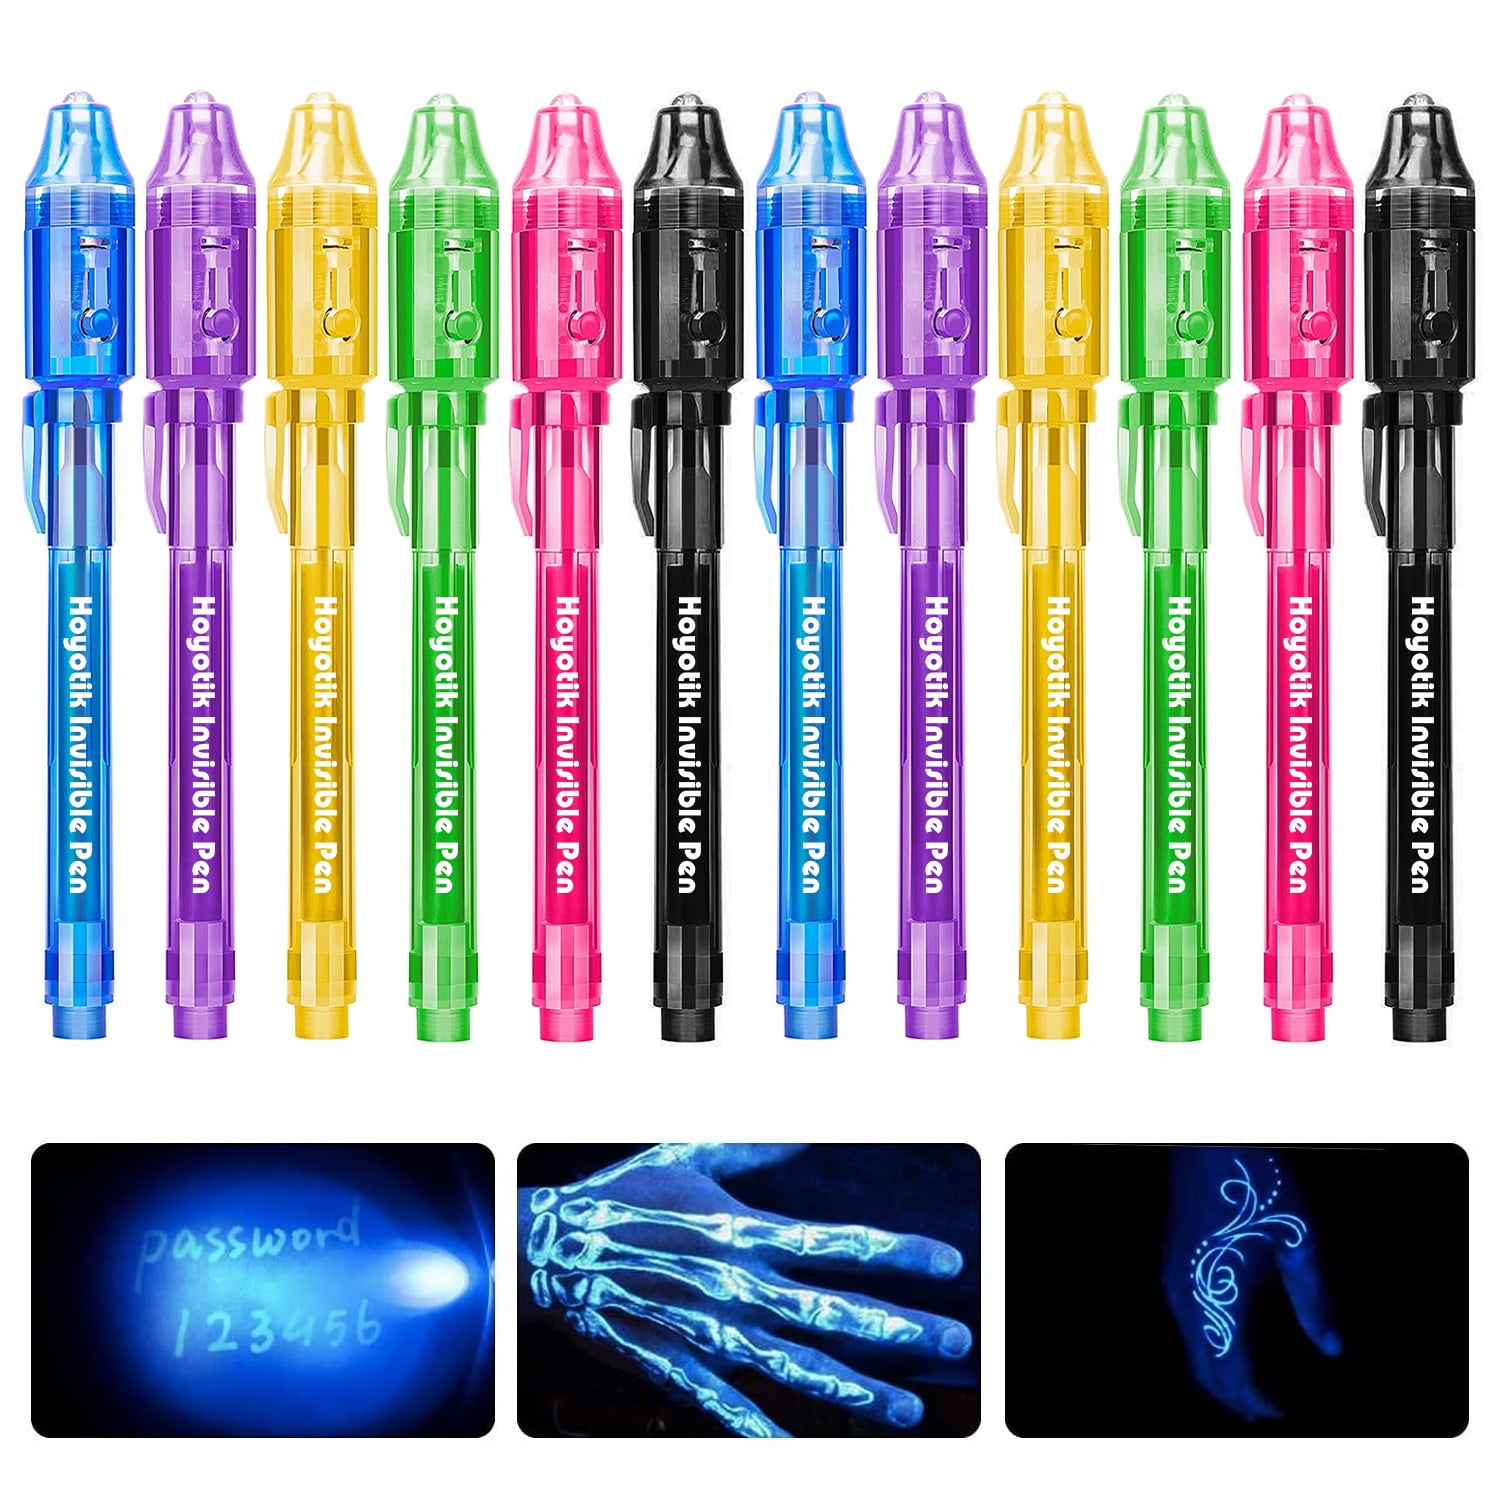 Novelty Toys Magical Invisible Ink Pen with UV Light for Promotional Use -  China Invisible Ink Pen, Pen